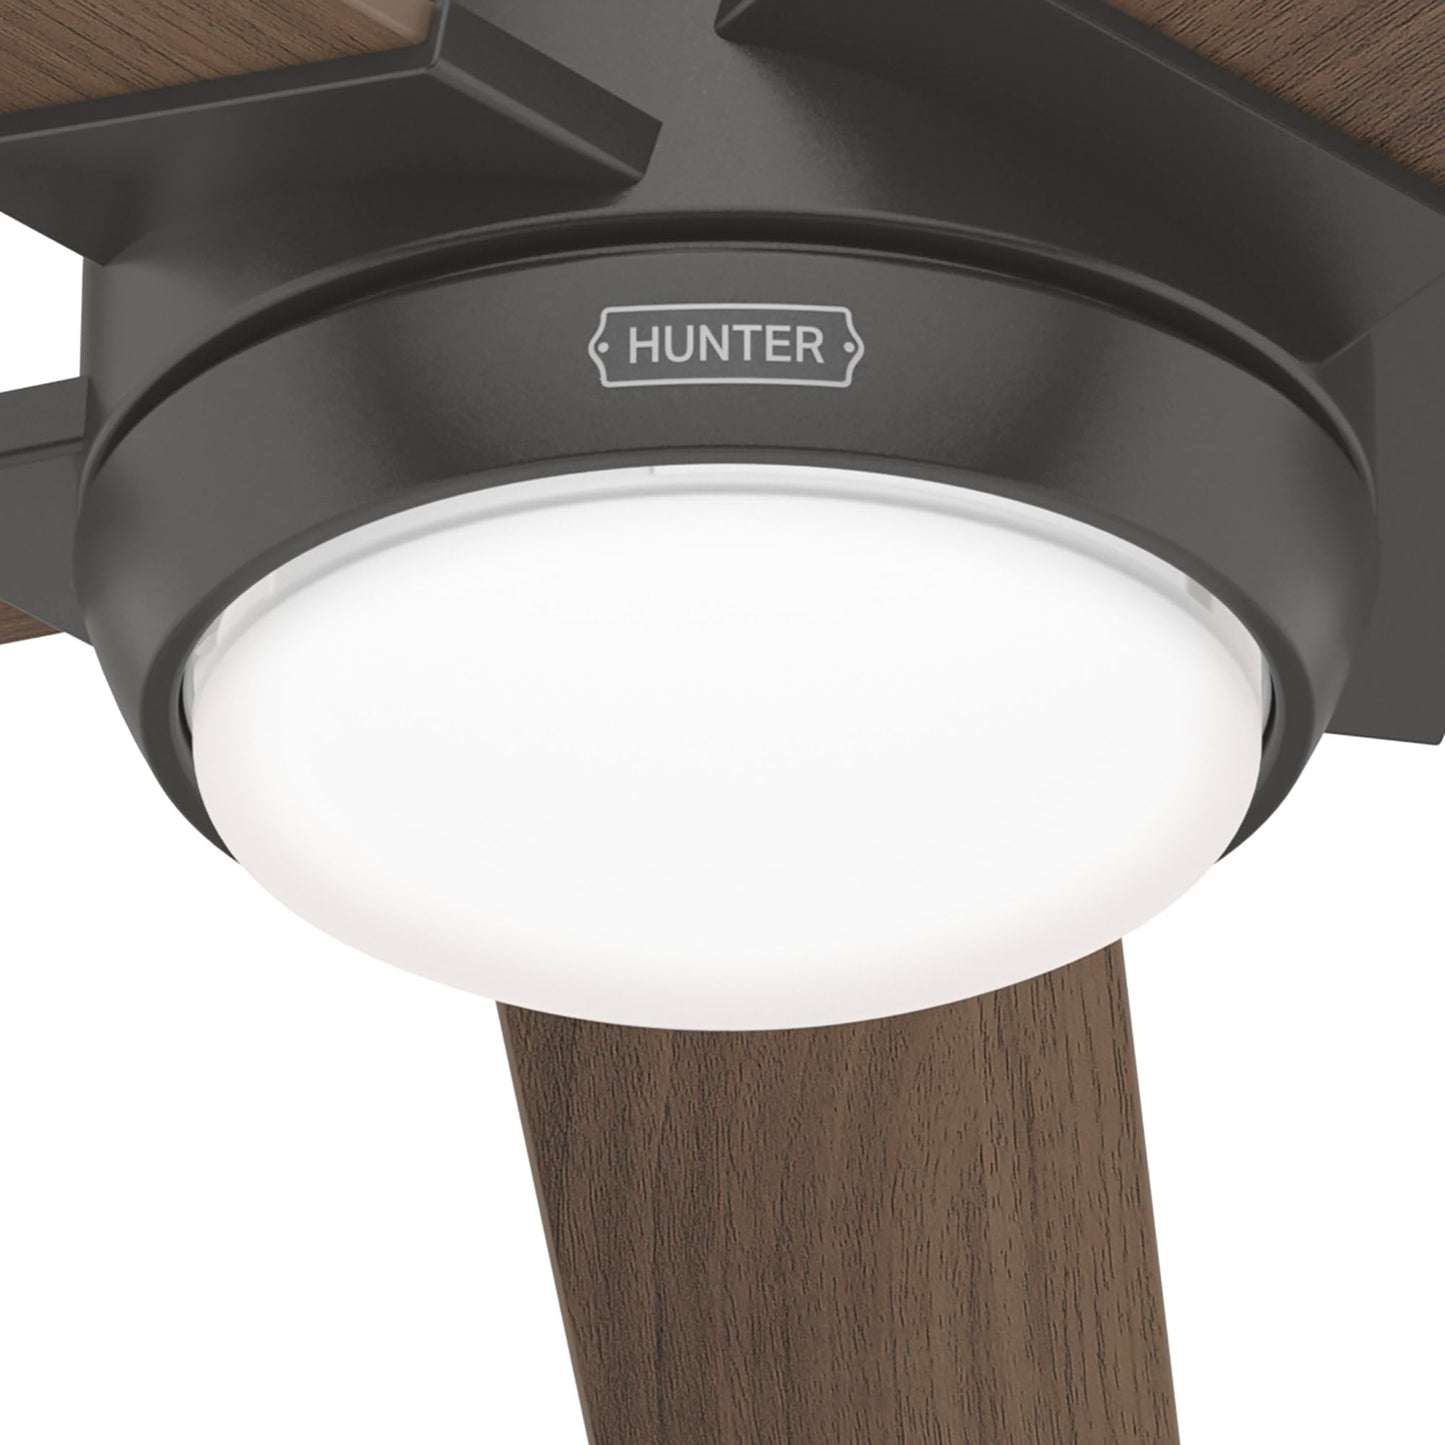 Hunter Fan Company, 52243, 52 inch Byhalia Noble Bronze Damp Rated Ceiling Fan with LED Light Kit and Handheld Remote